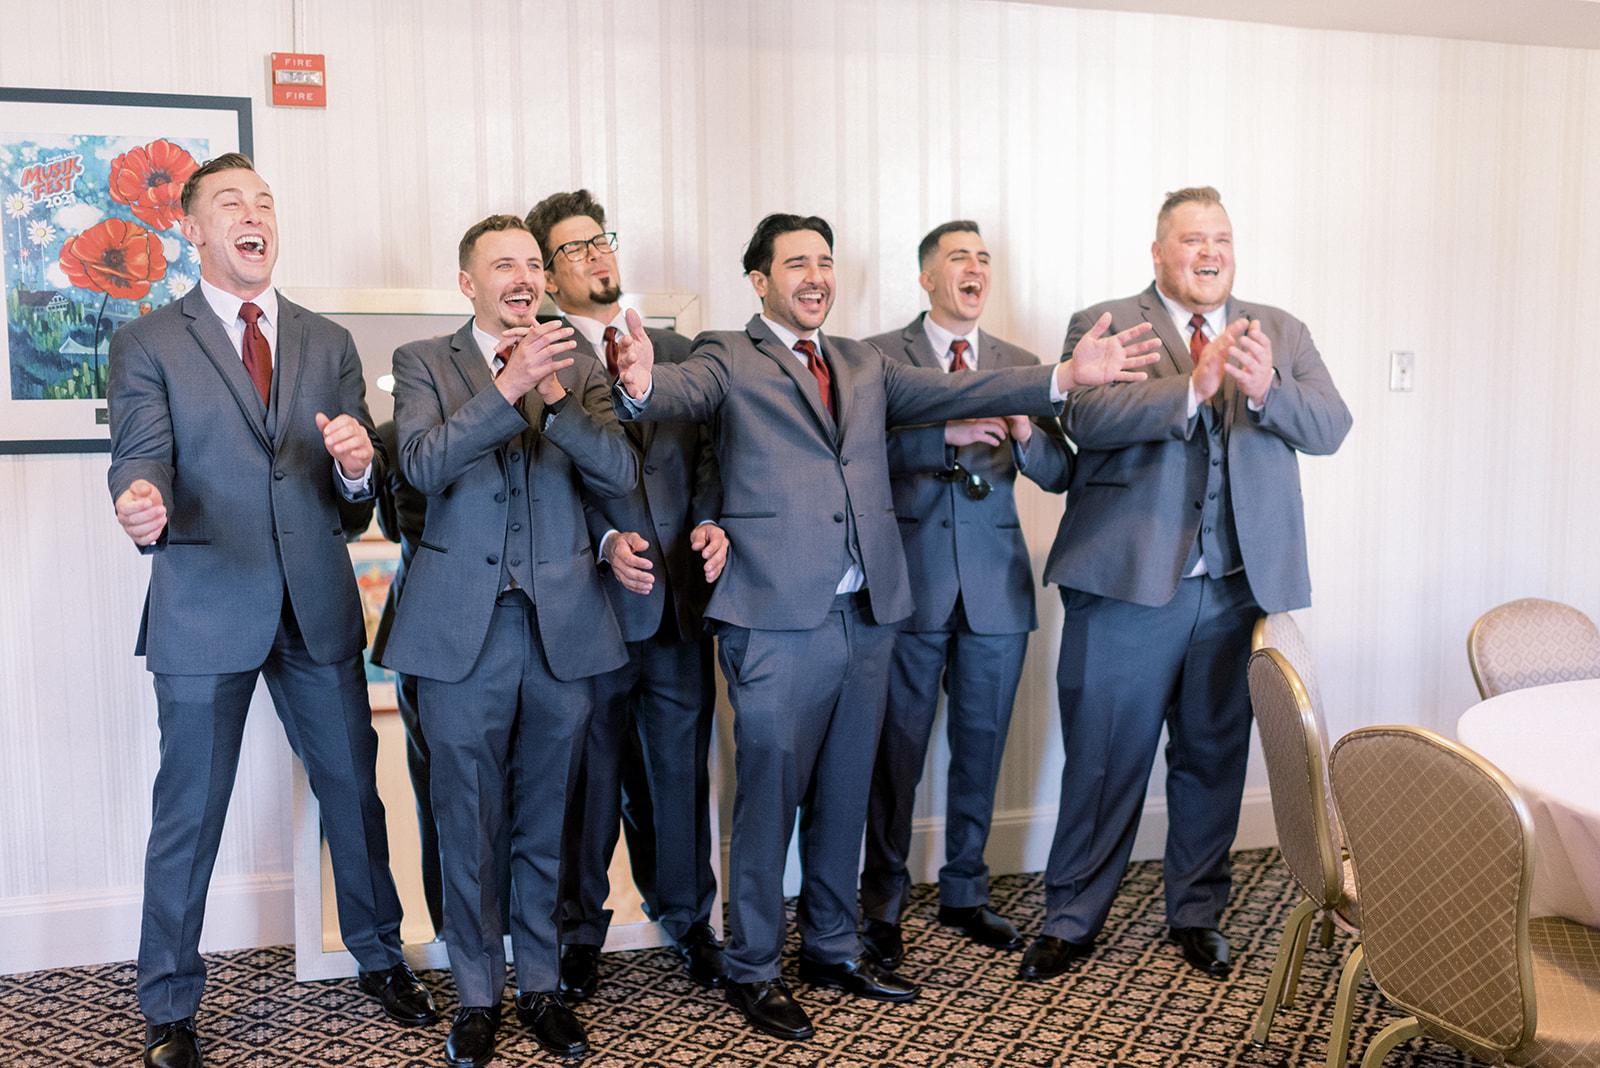 Pennsylvania wedding photographer captures groomsmen smiling and celebrating seeing bride for first time